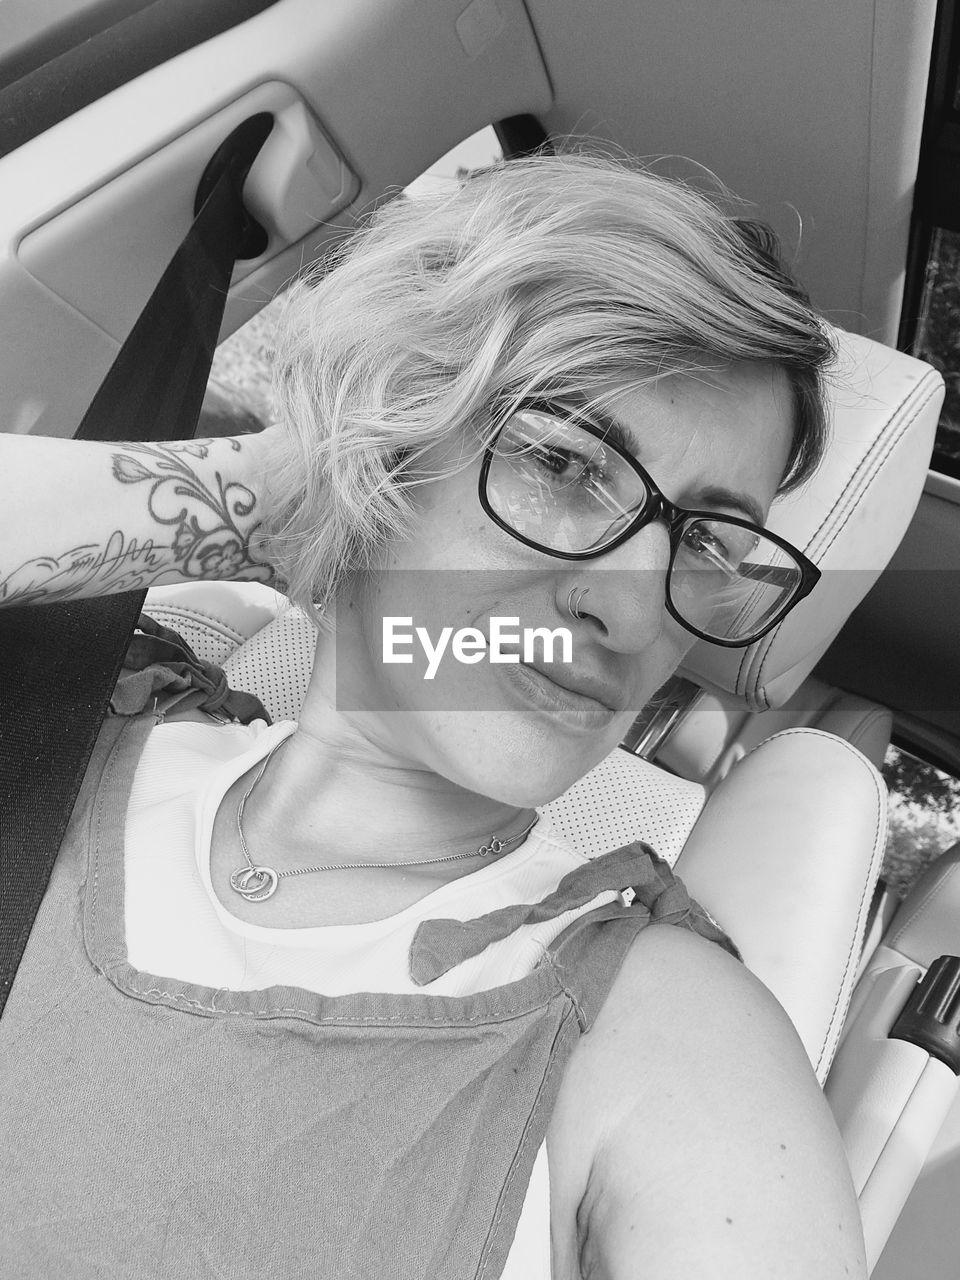 white, black and white, glasses, one person, eyeglasses, monochrome photography, women, monochrome, adult, eyewear, vision care, portrait, black, lifestyles, person, indoors, blond hair, leisure activity, female, young adult, high angle view, headshot, human face, fashion, clothing, sunglasses, lying down, relaxation, hairstyle